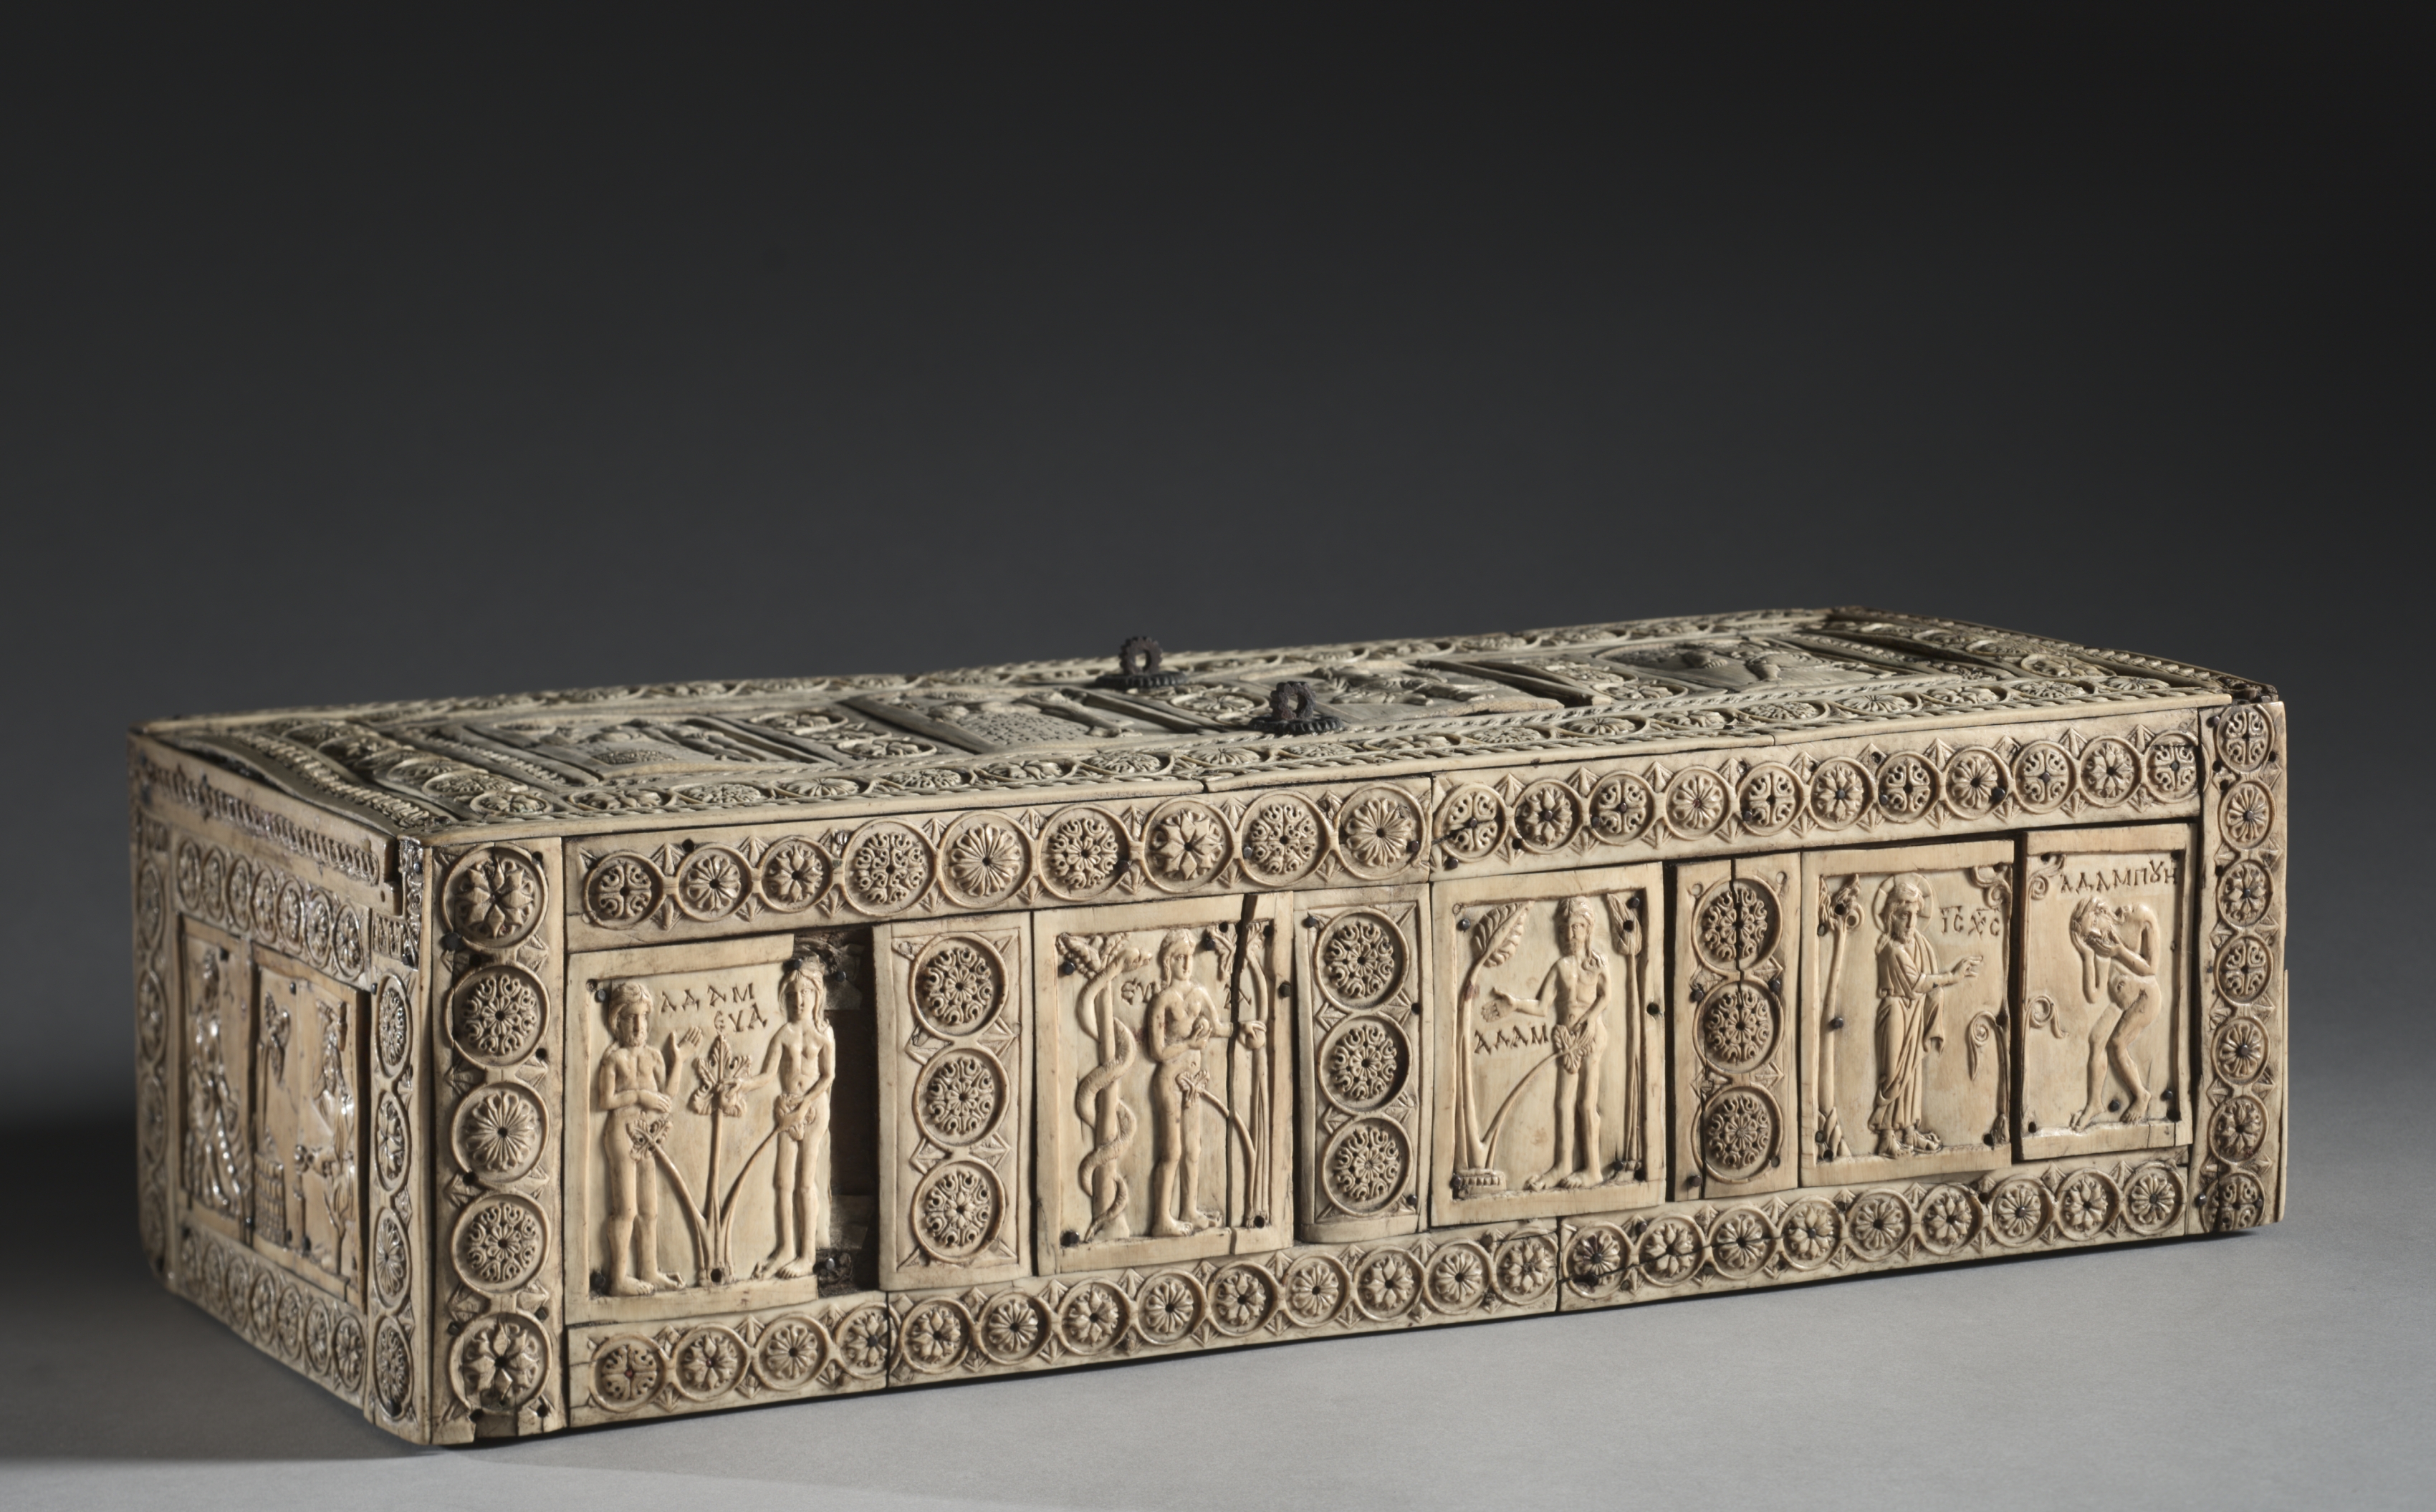 Ivory Box with Scenes of Adam and Eve